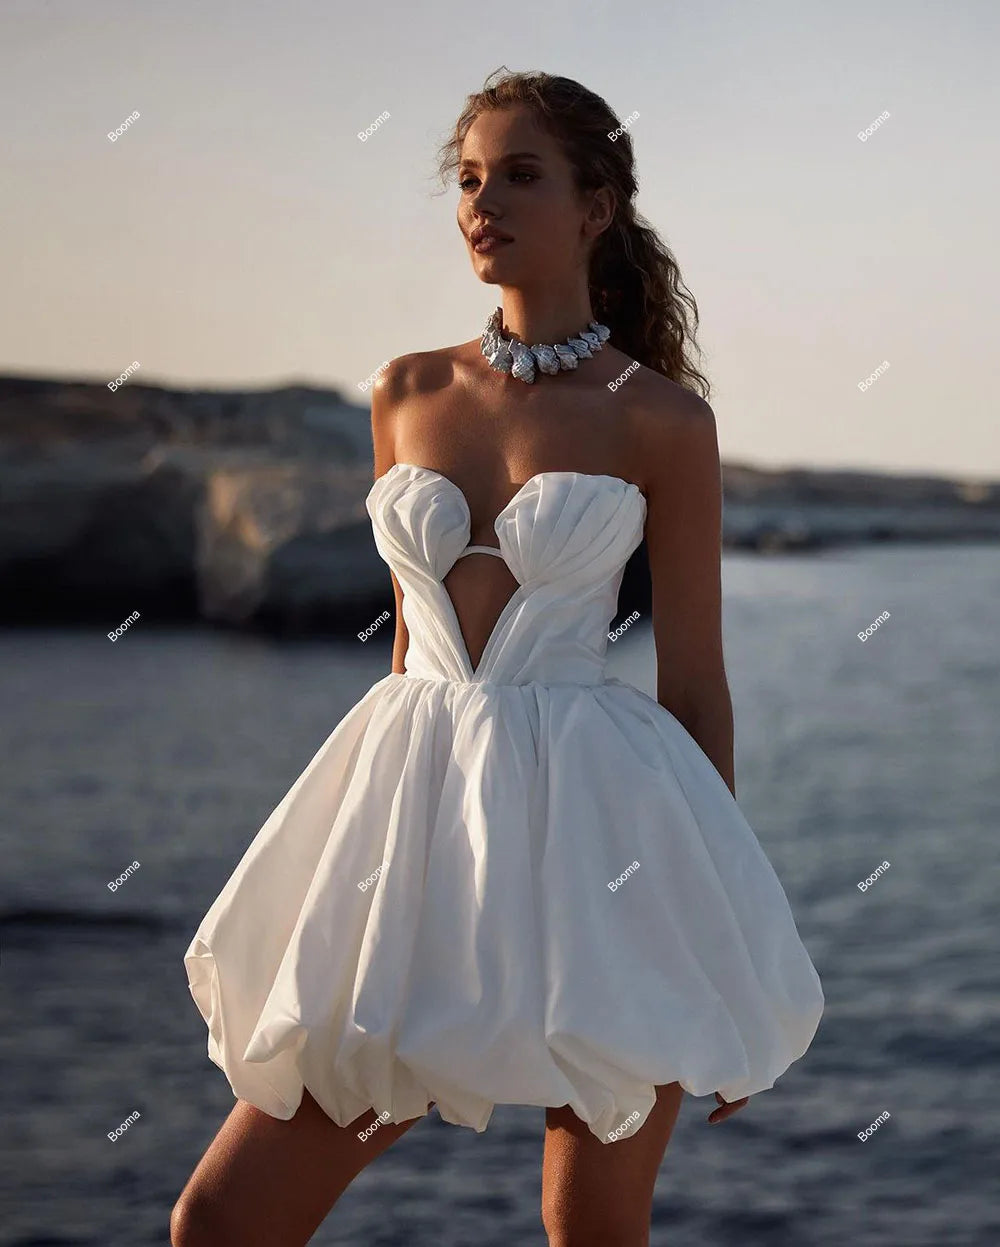 Simple Elegant Short Wedding Dresses Strapless Ball Gowns Mermaid Brides Evening Dresses for Women Party Cocktail Gowns